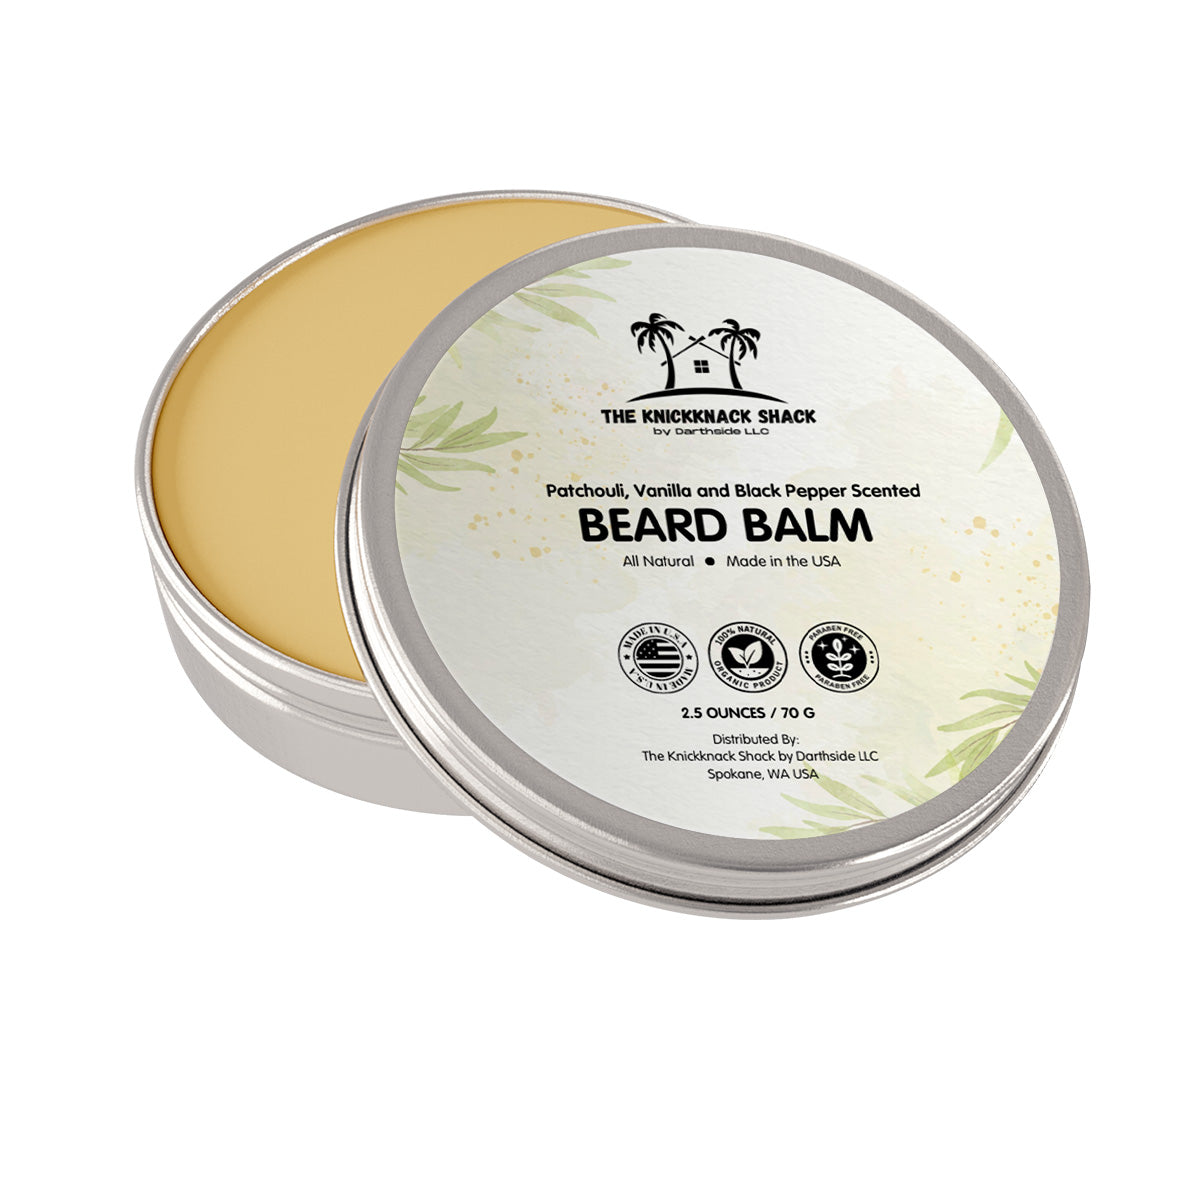 Patchouli, Vanilla and Black Pepper Scented Beard Balm